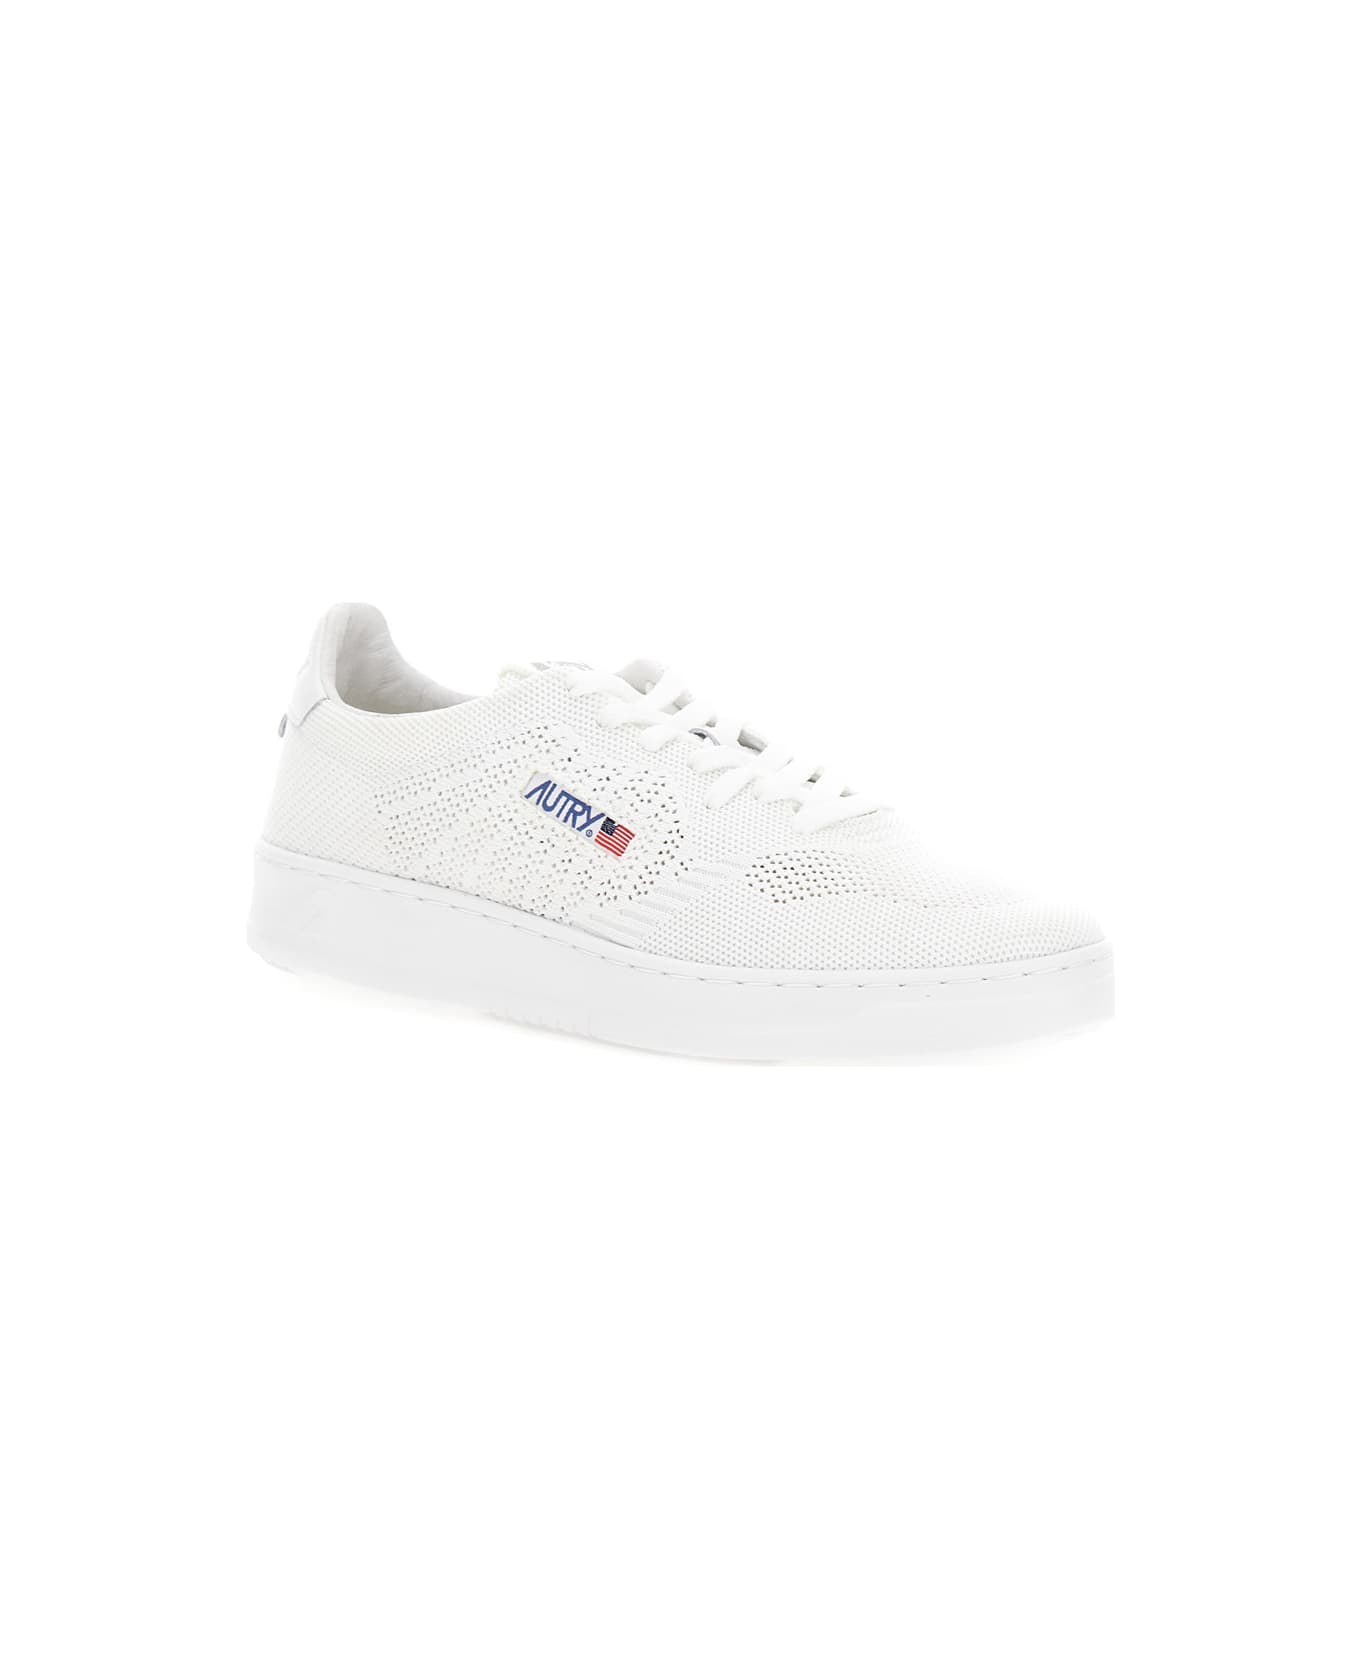 Autry 'medalist Easeknit' White Low Top Sneakers With Perforated Design In Knit Man - White